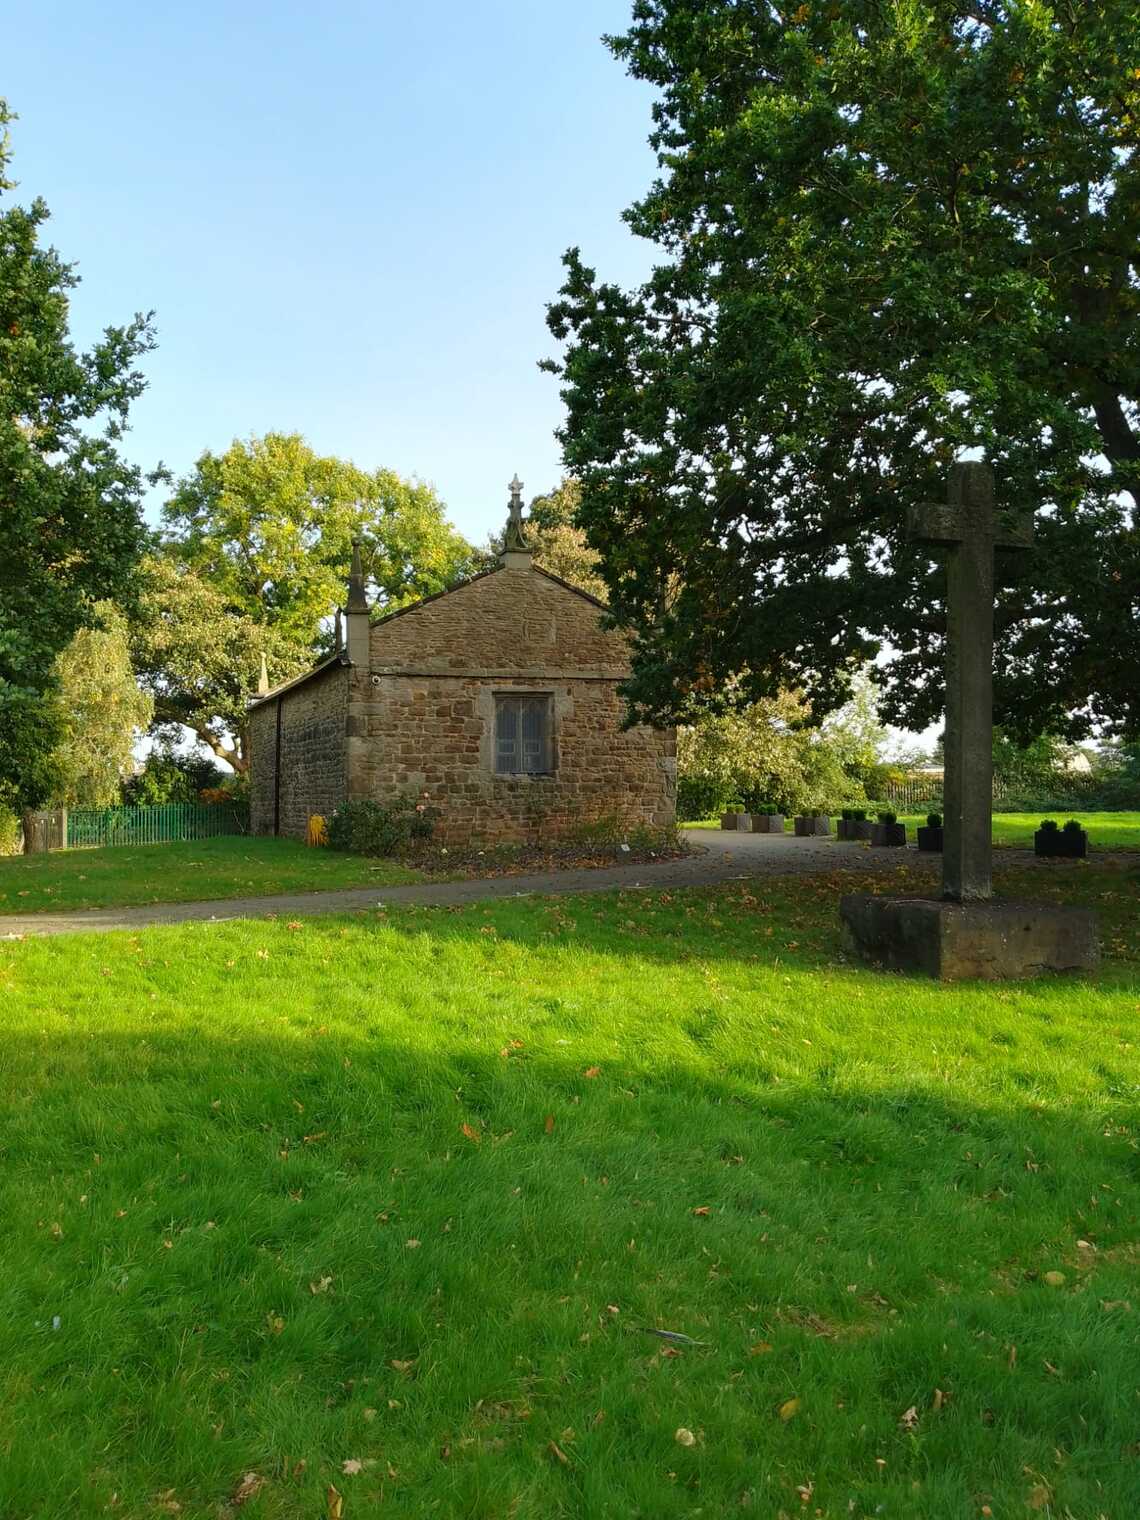 The grounds and Chapel